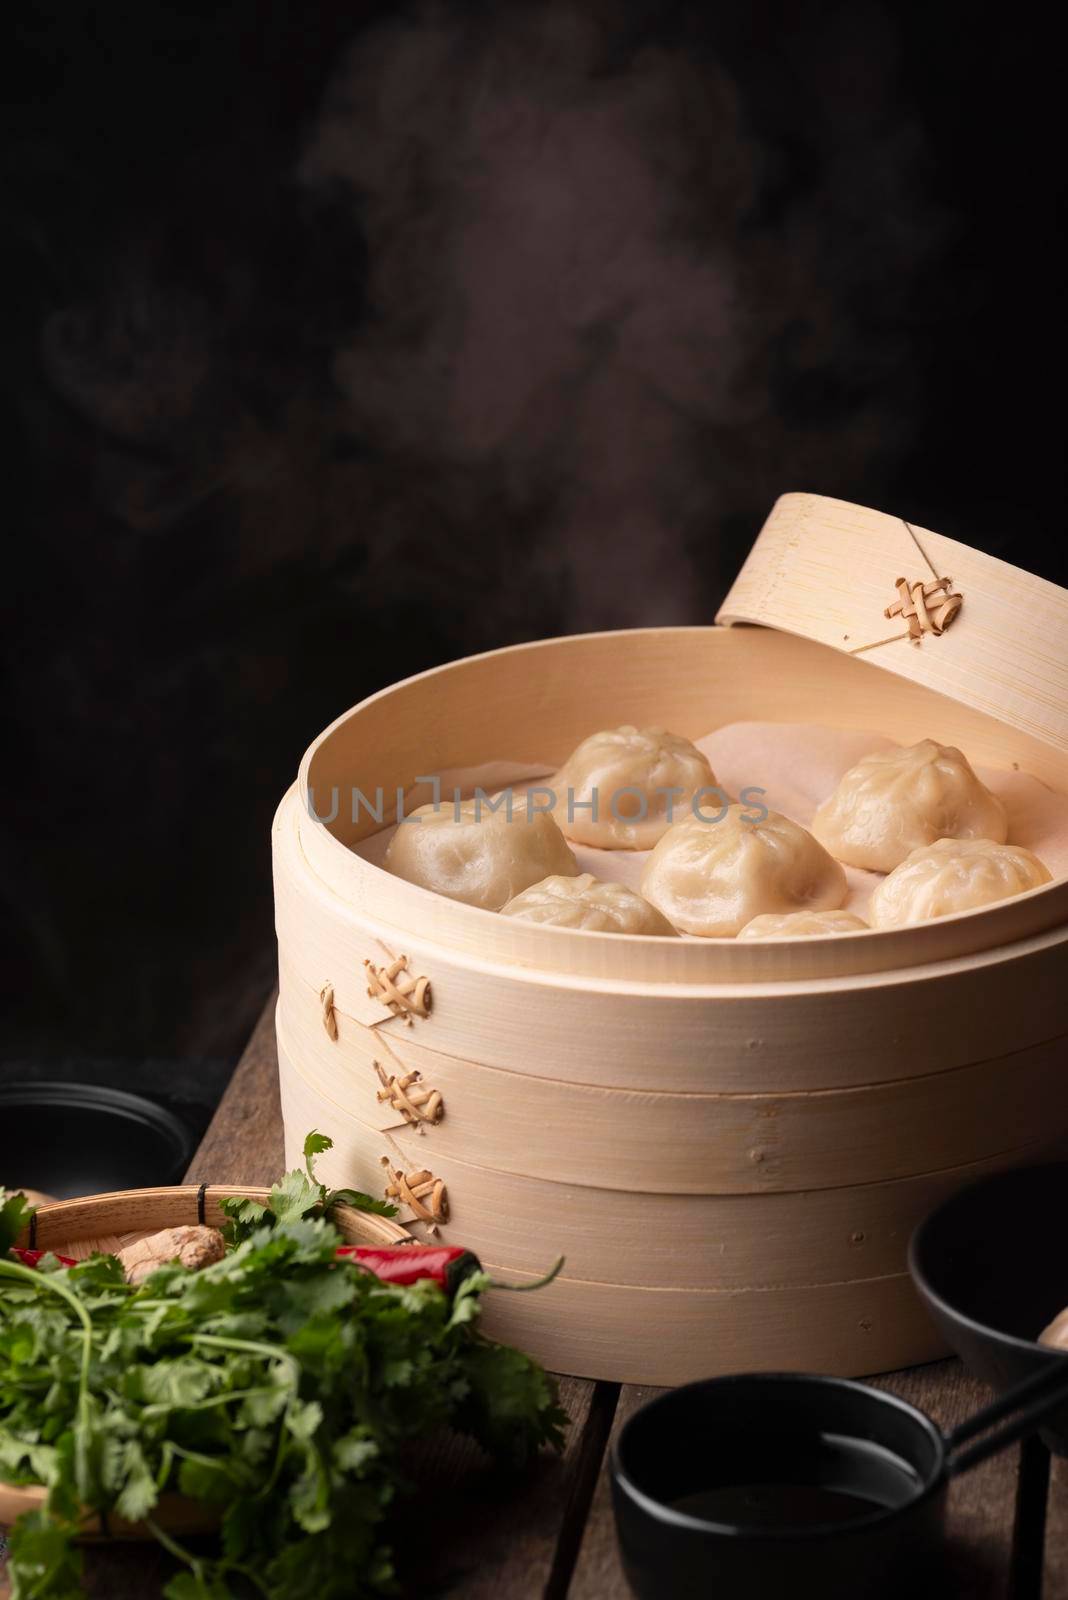 high angle traditional asian dumplings with copy space. High quality photo by Zahard